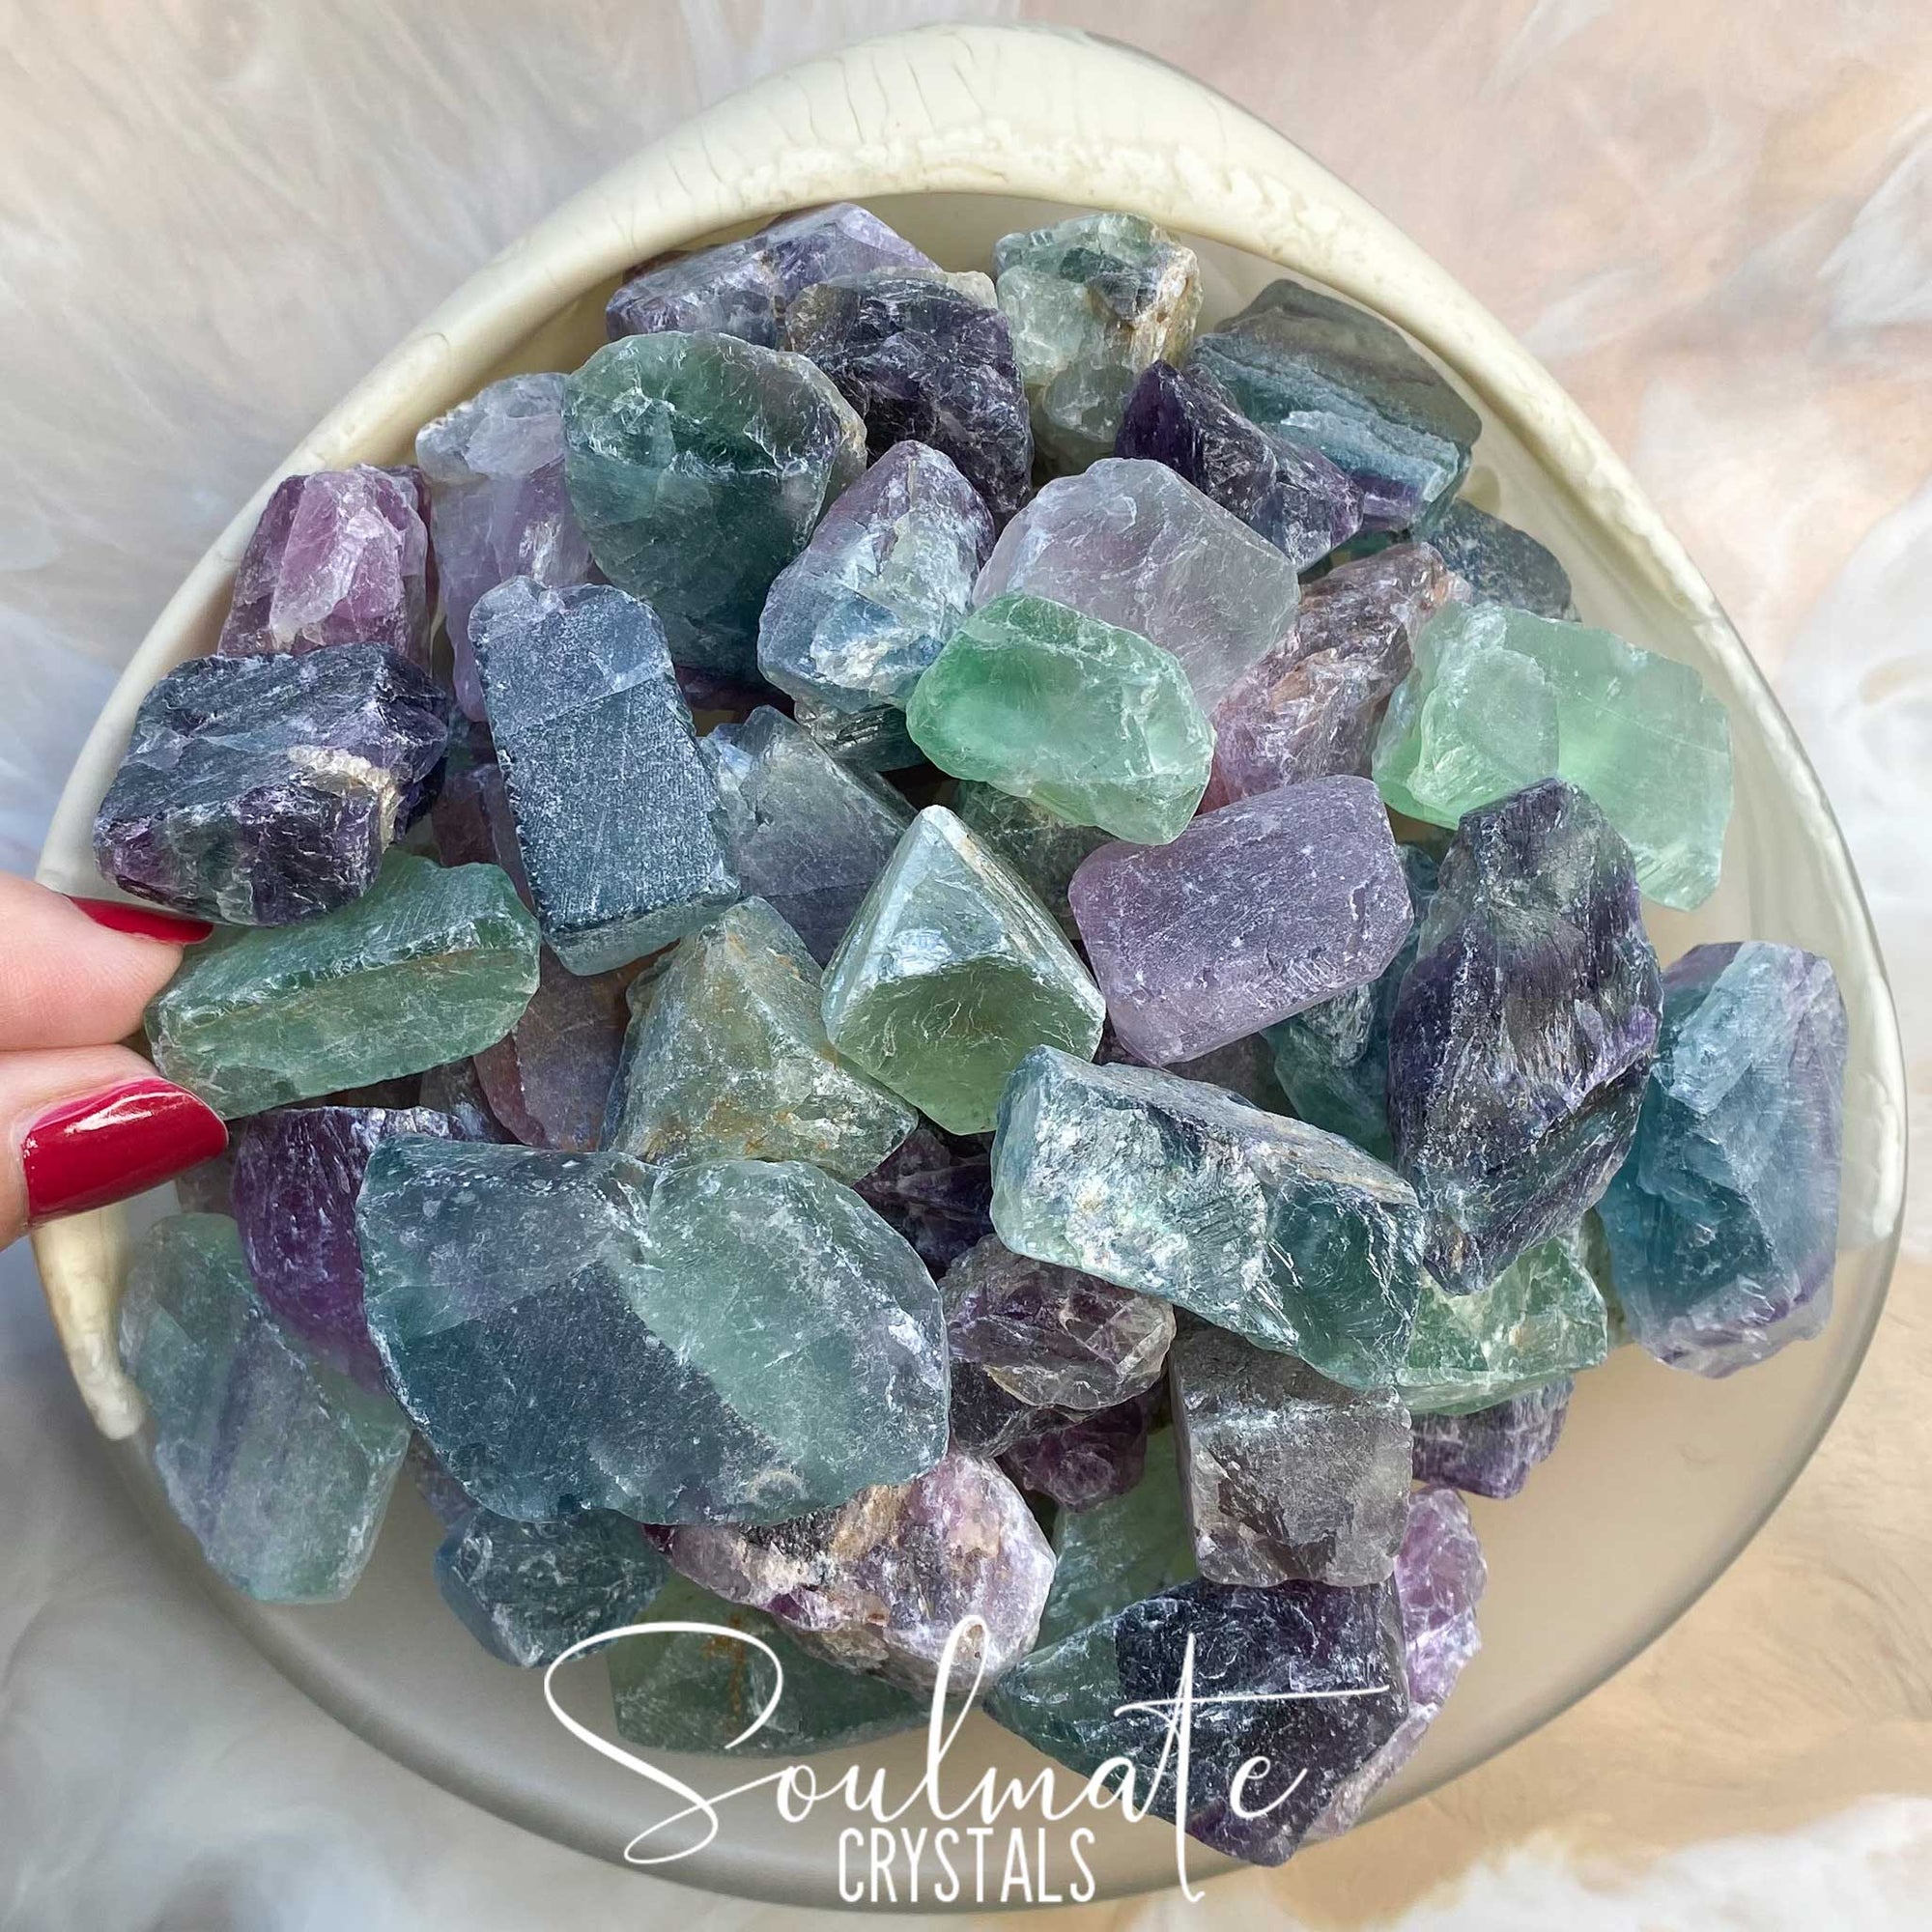 Soulmate Crystals Rainbow Fluorite Raw Natural Stone Mix Pack, Blue, Green, Purple Fluorite Crystal for Clarity, Decision Making, Study, Mental Agility.